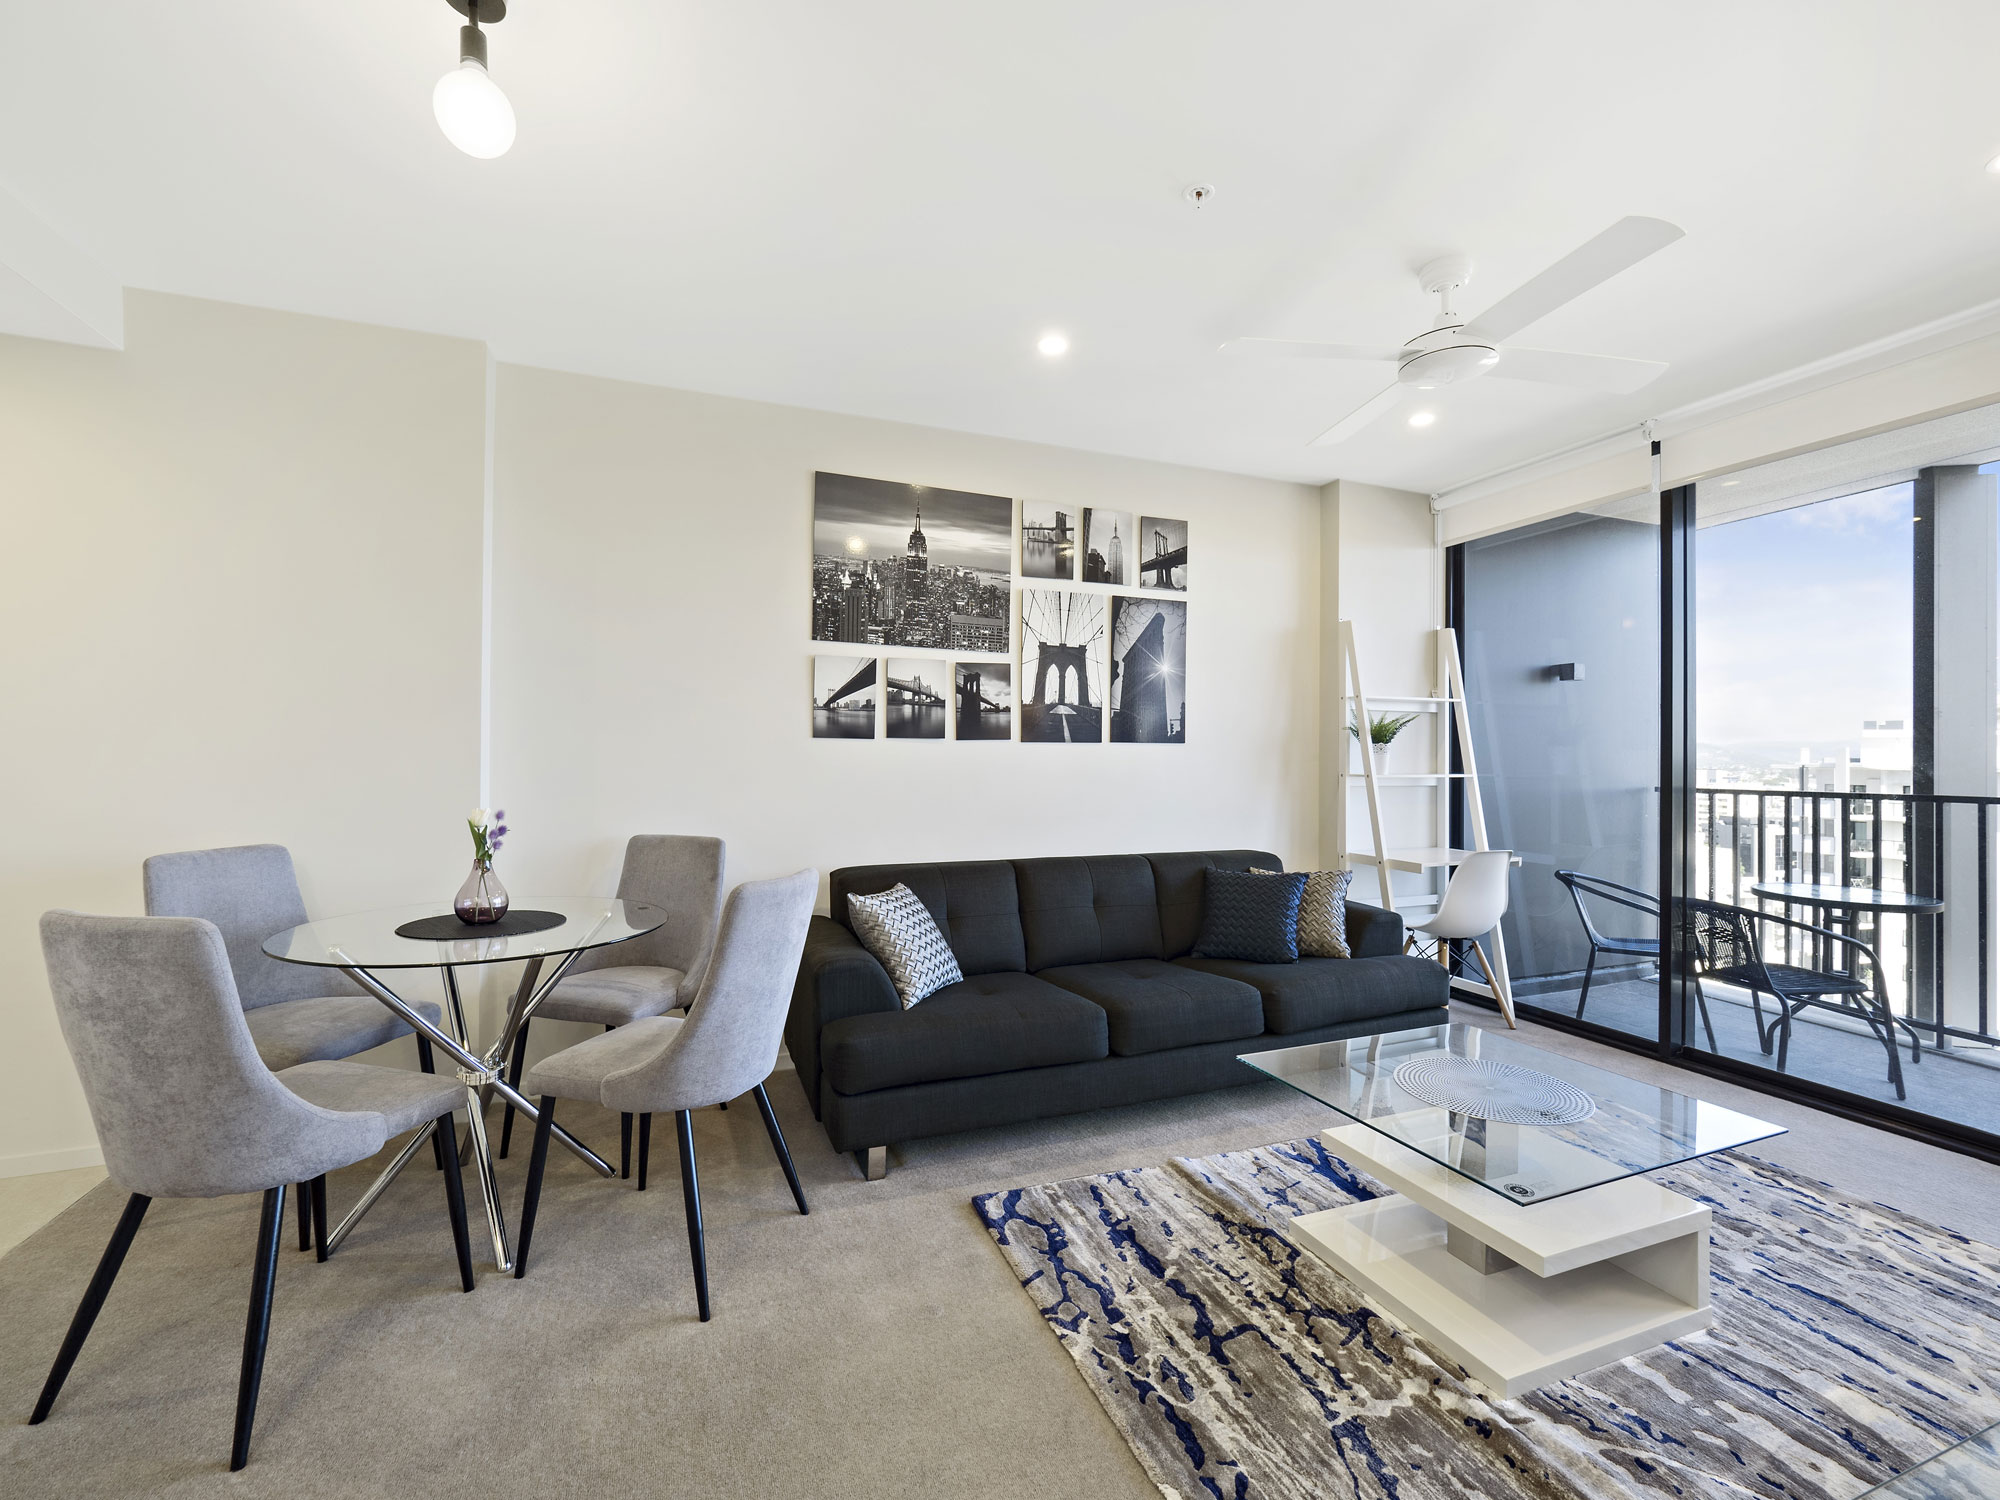 Apartment photography in Brisbane by Phil Savory